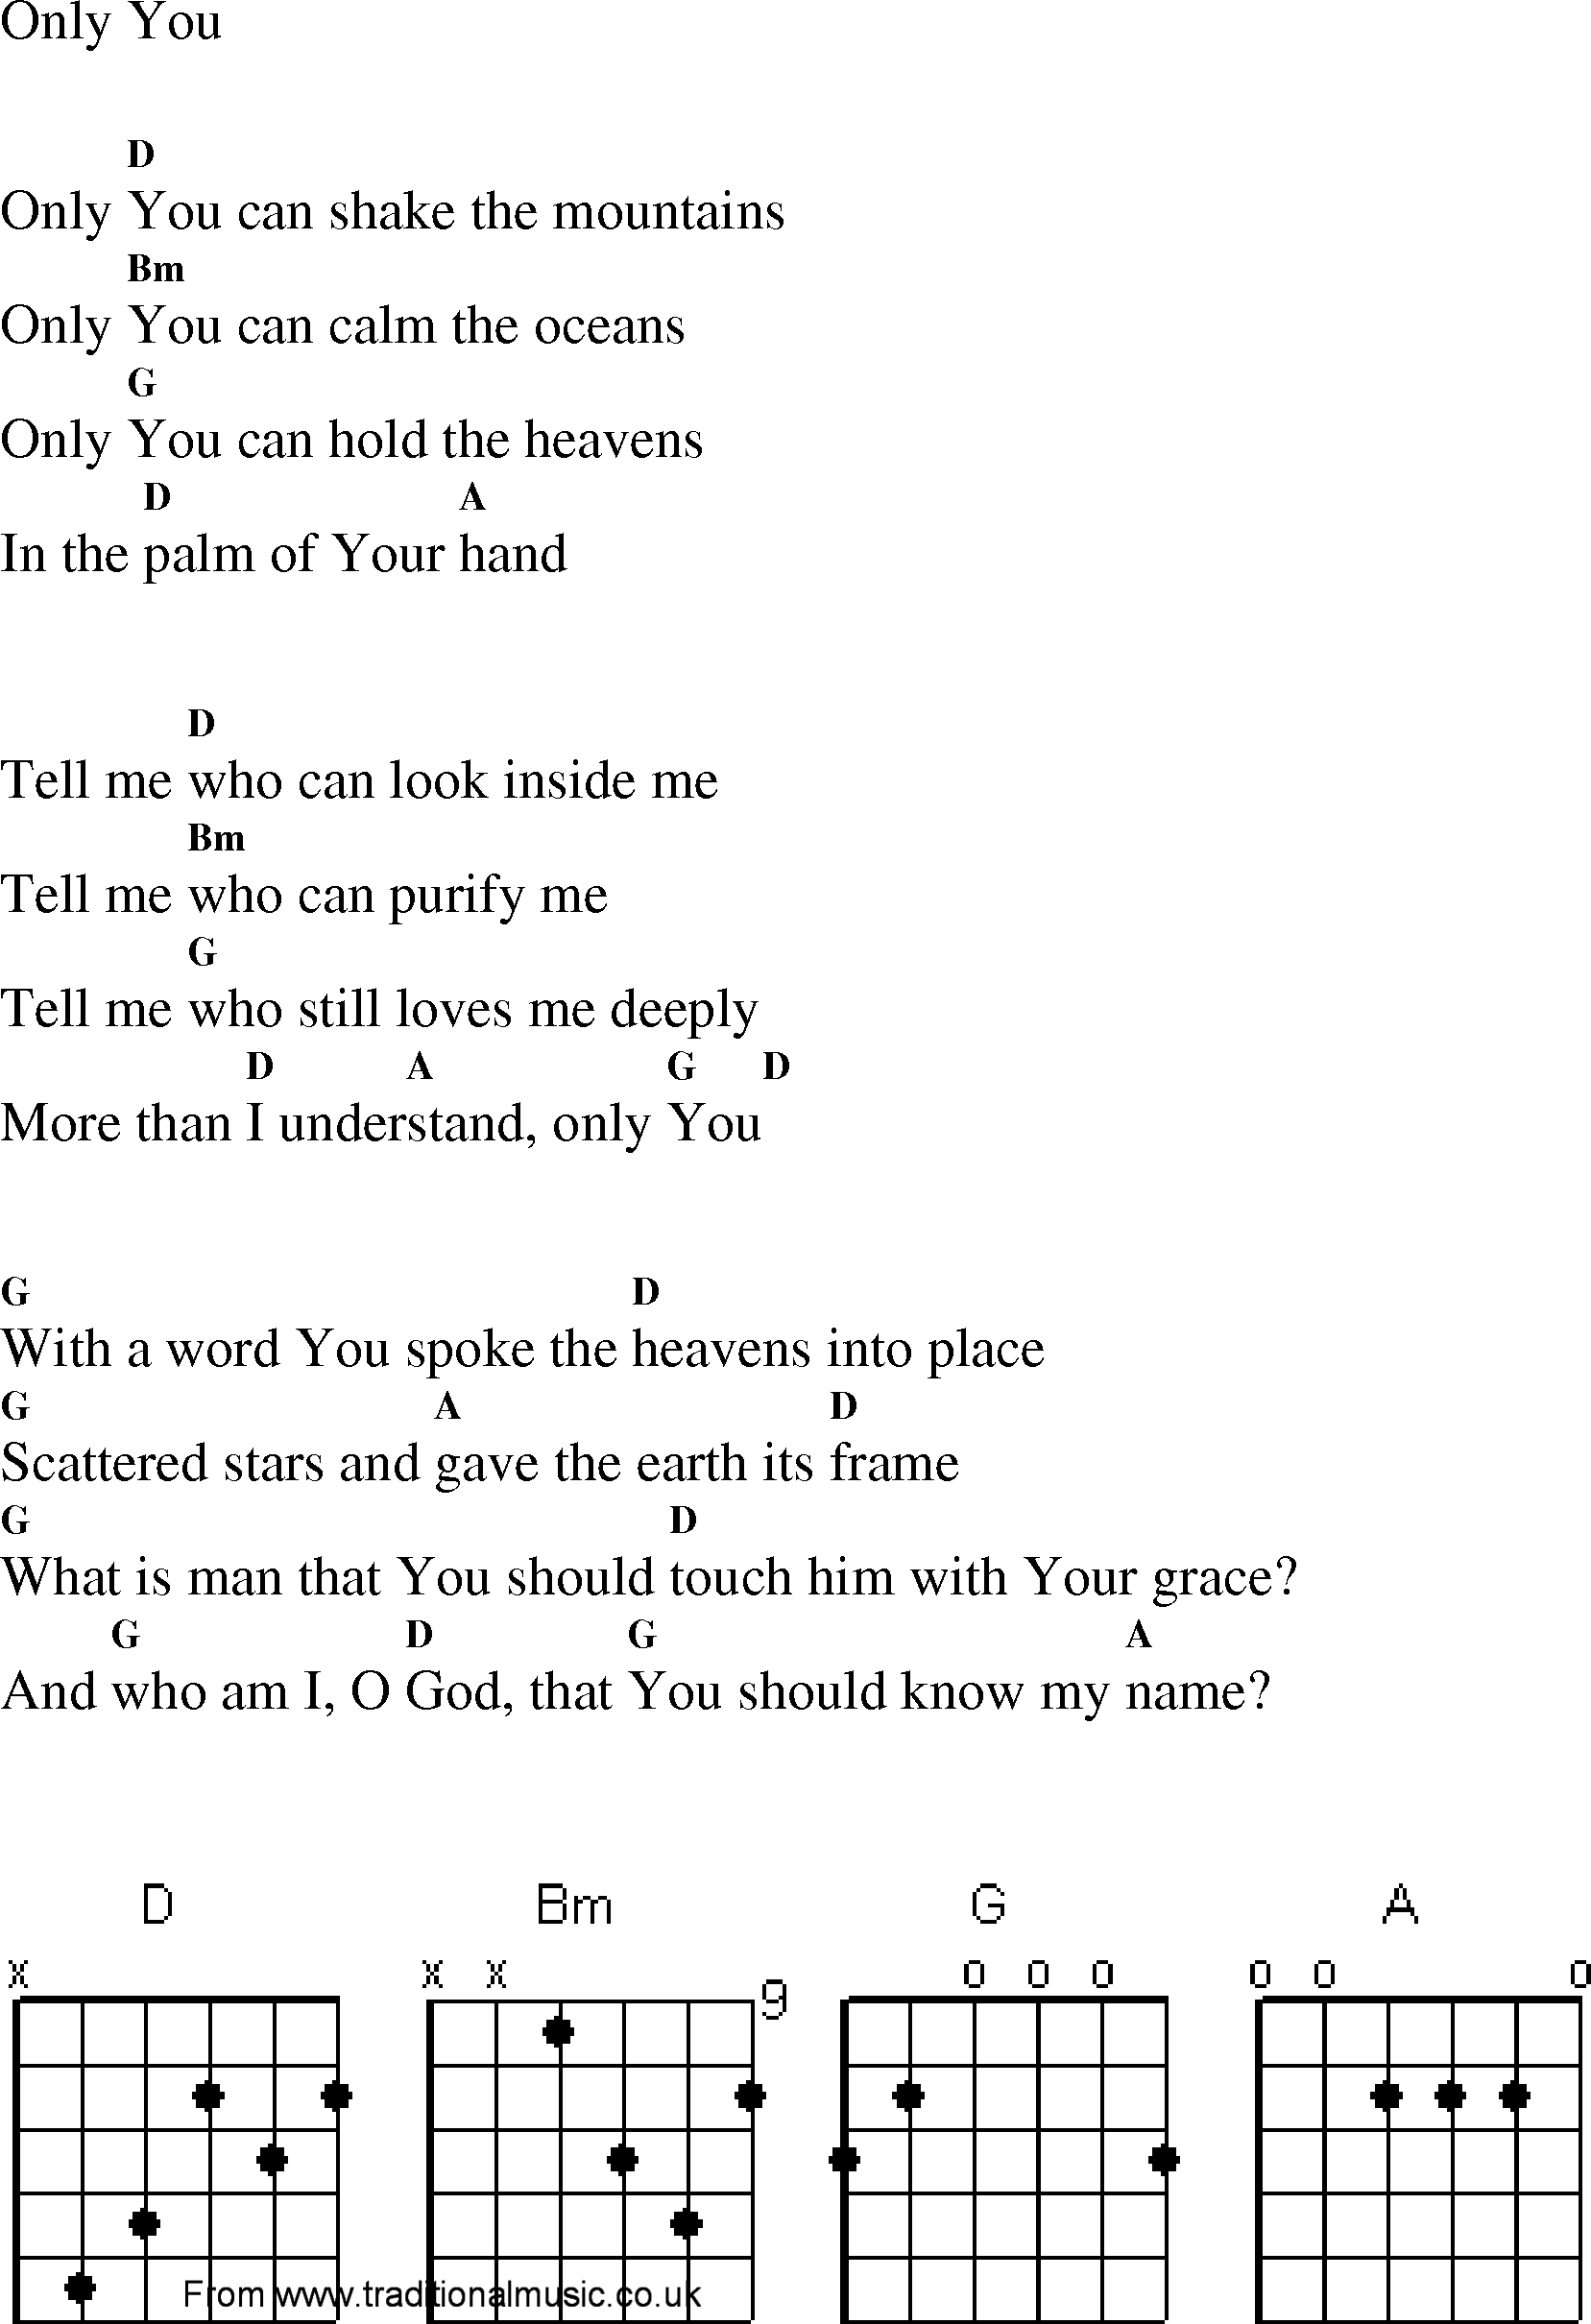 Gospel Song: only_you, lyrics and chords.